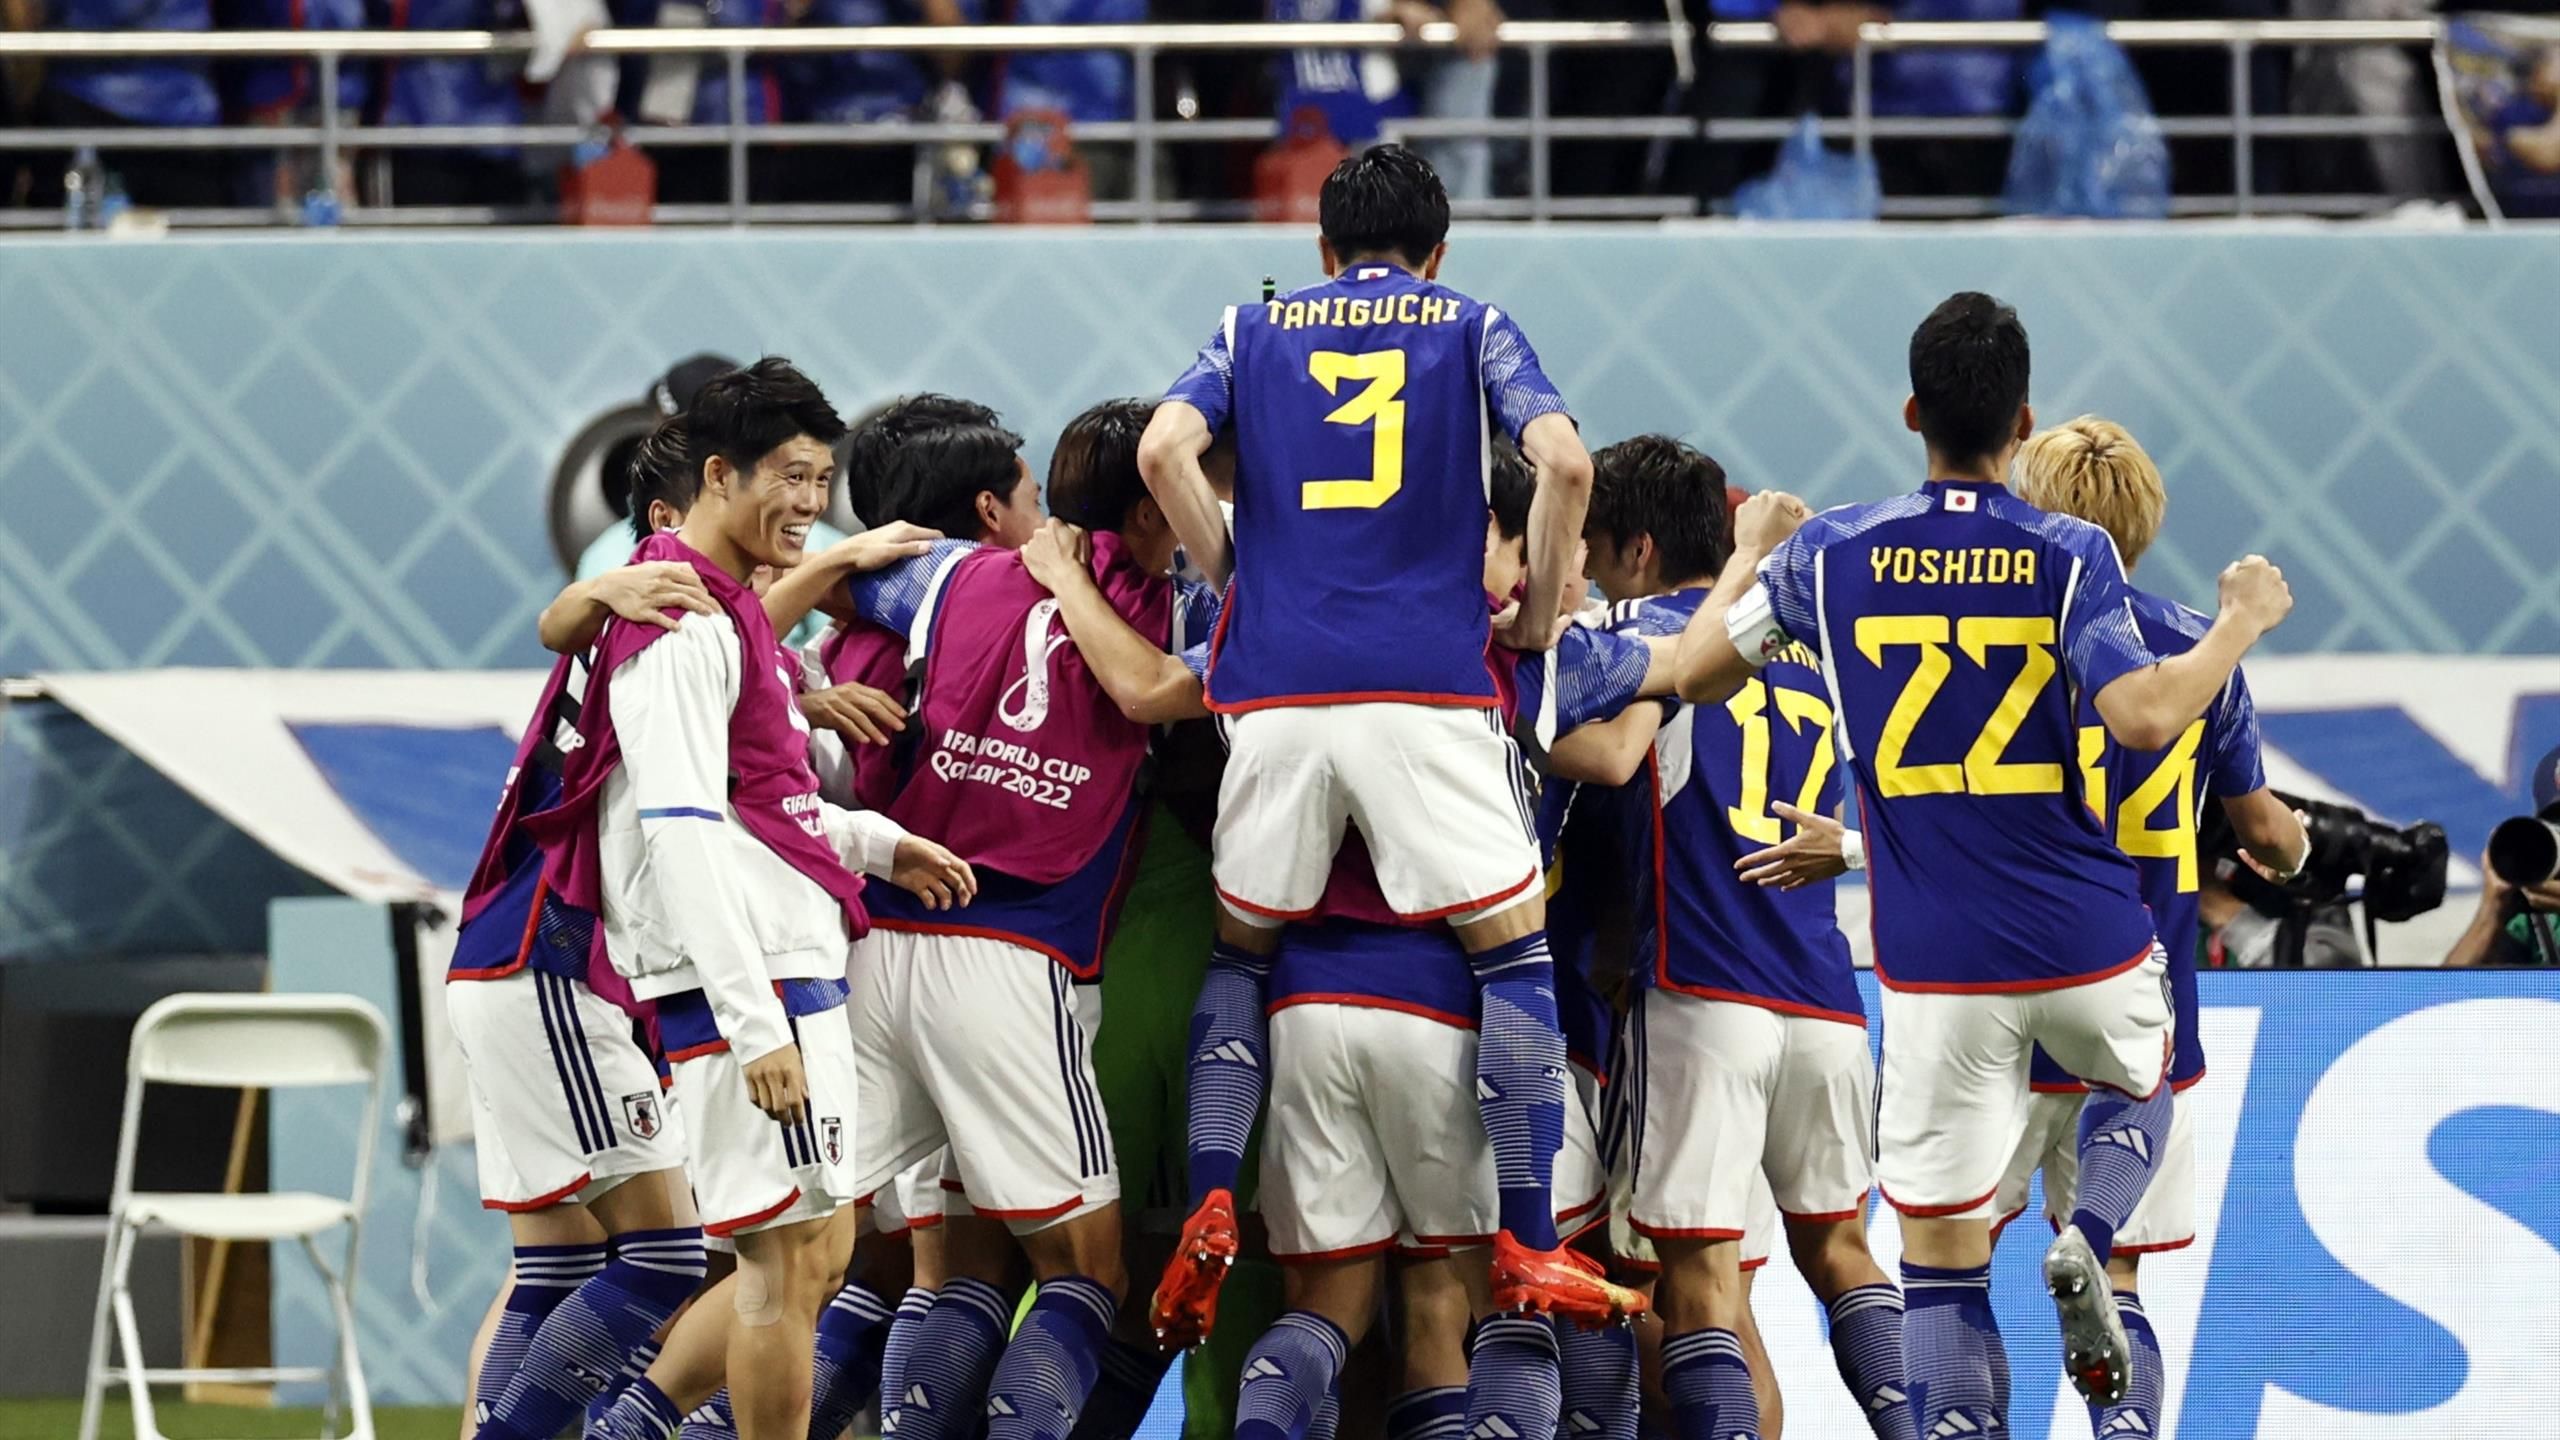 Germany 1-2 Japan: Player ratings as late Asano winner seals World Cup shock